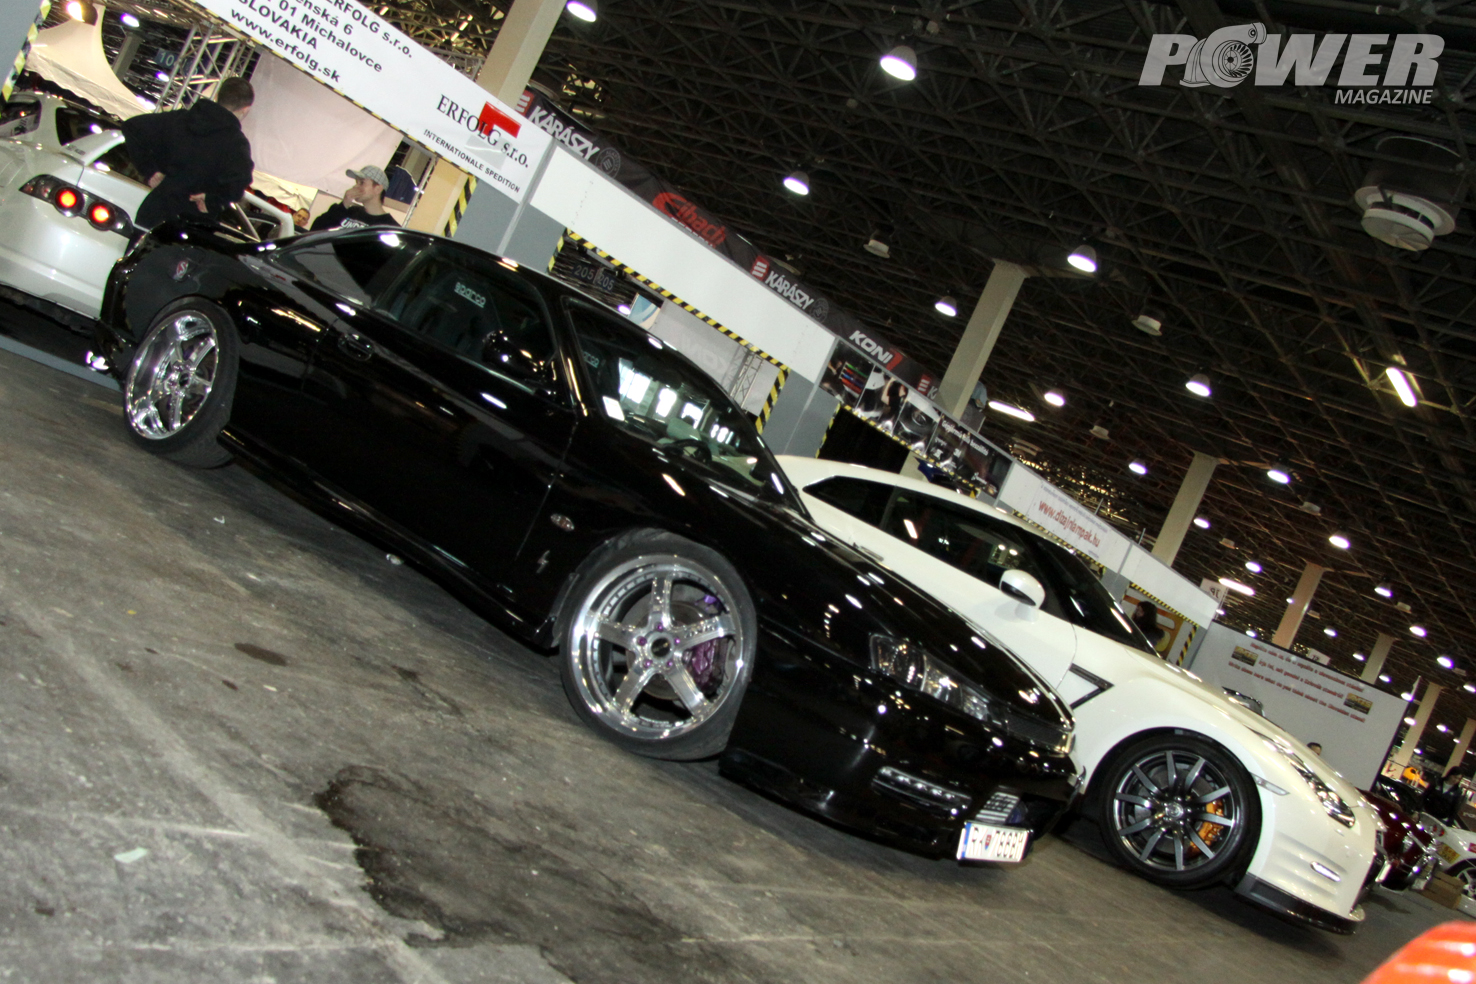 Tuning show